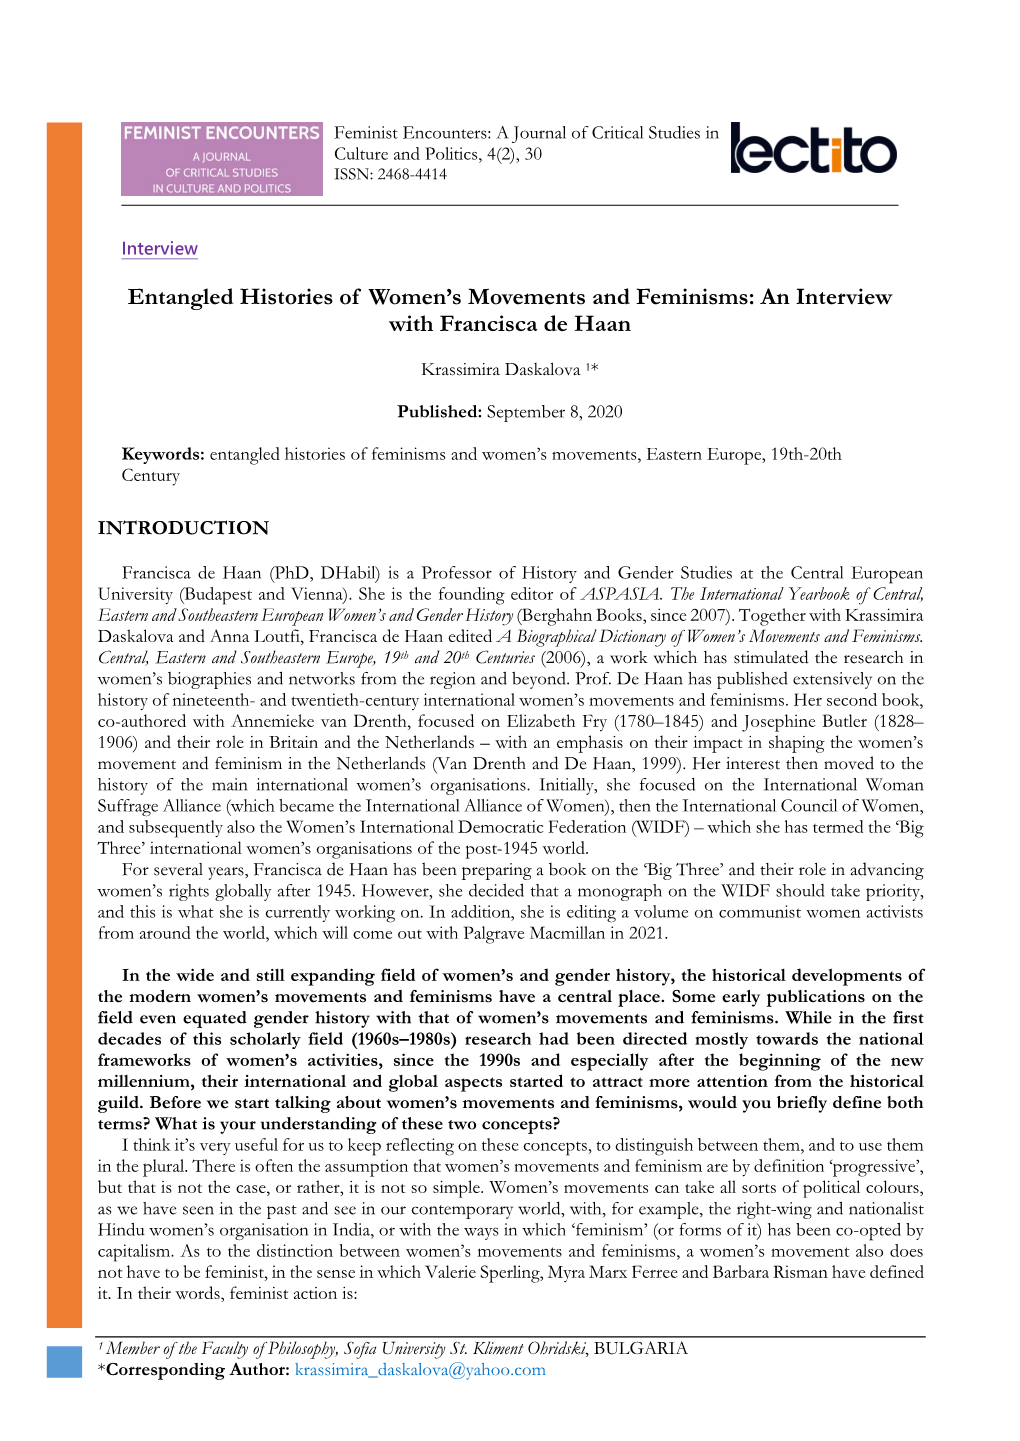 Entangled Histories of Women's Movements and Feminisms: An